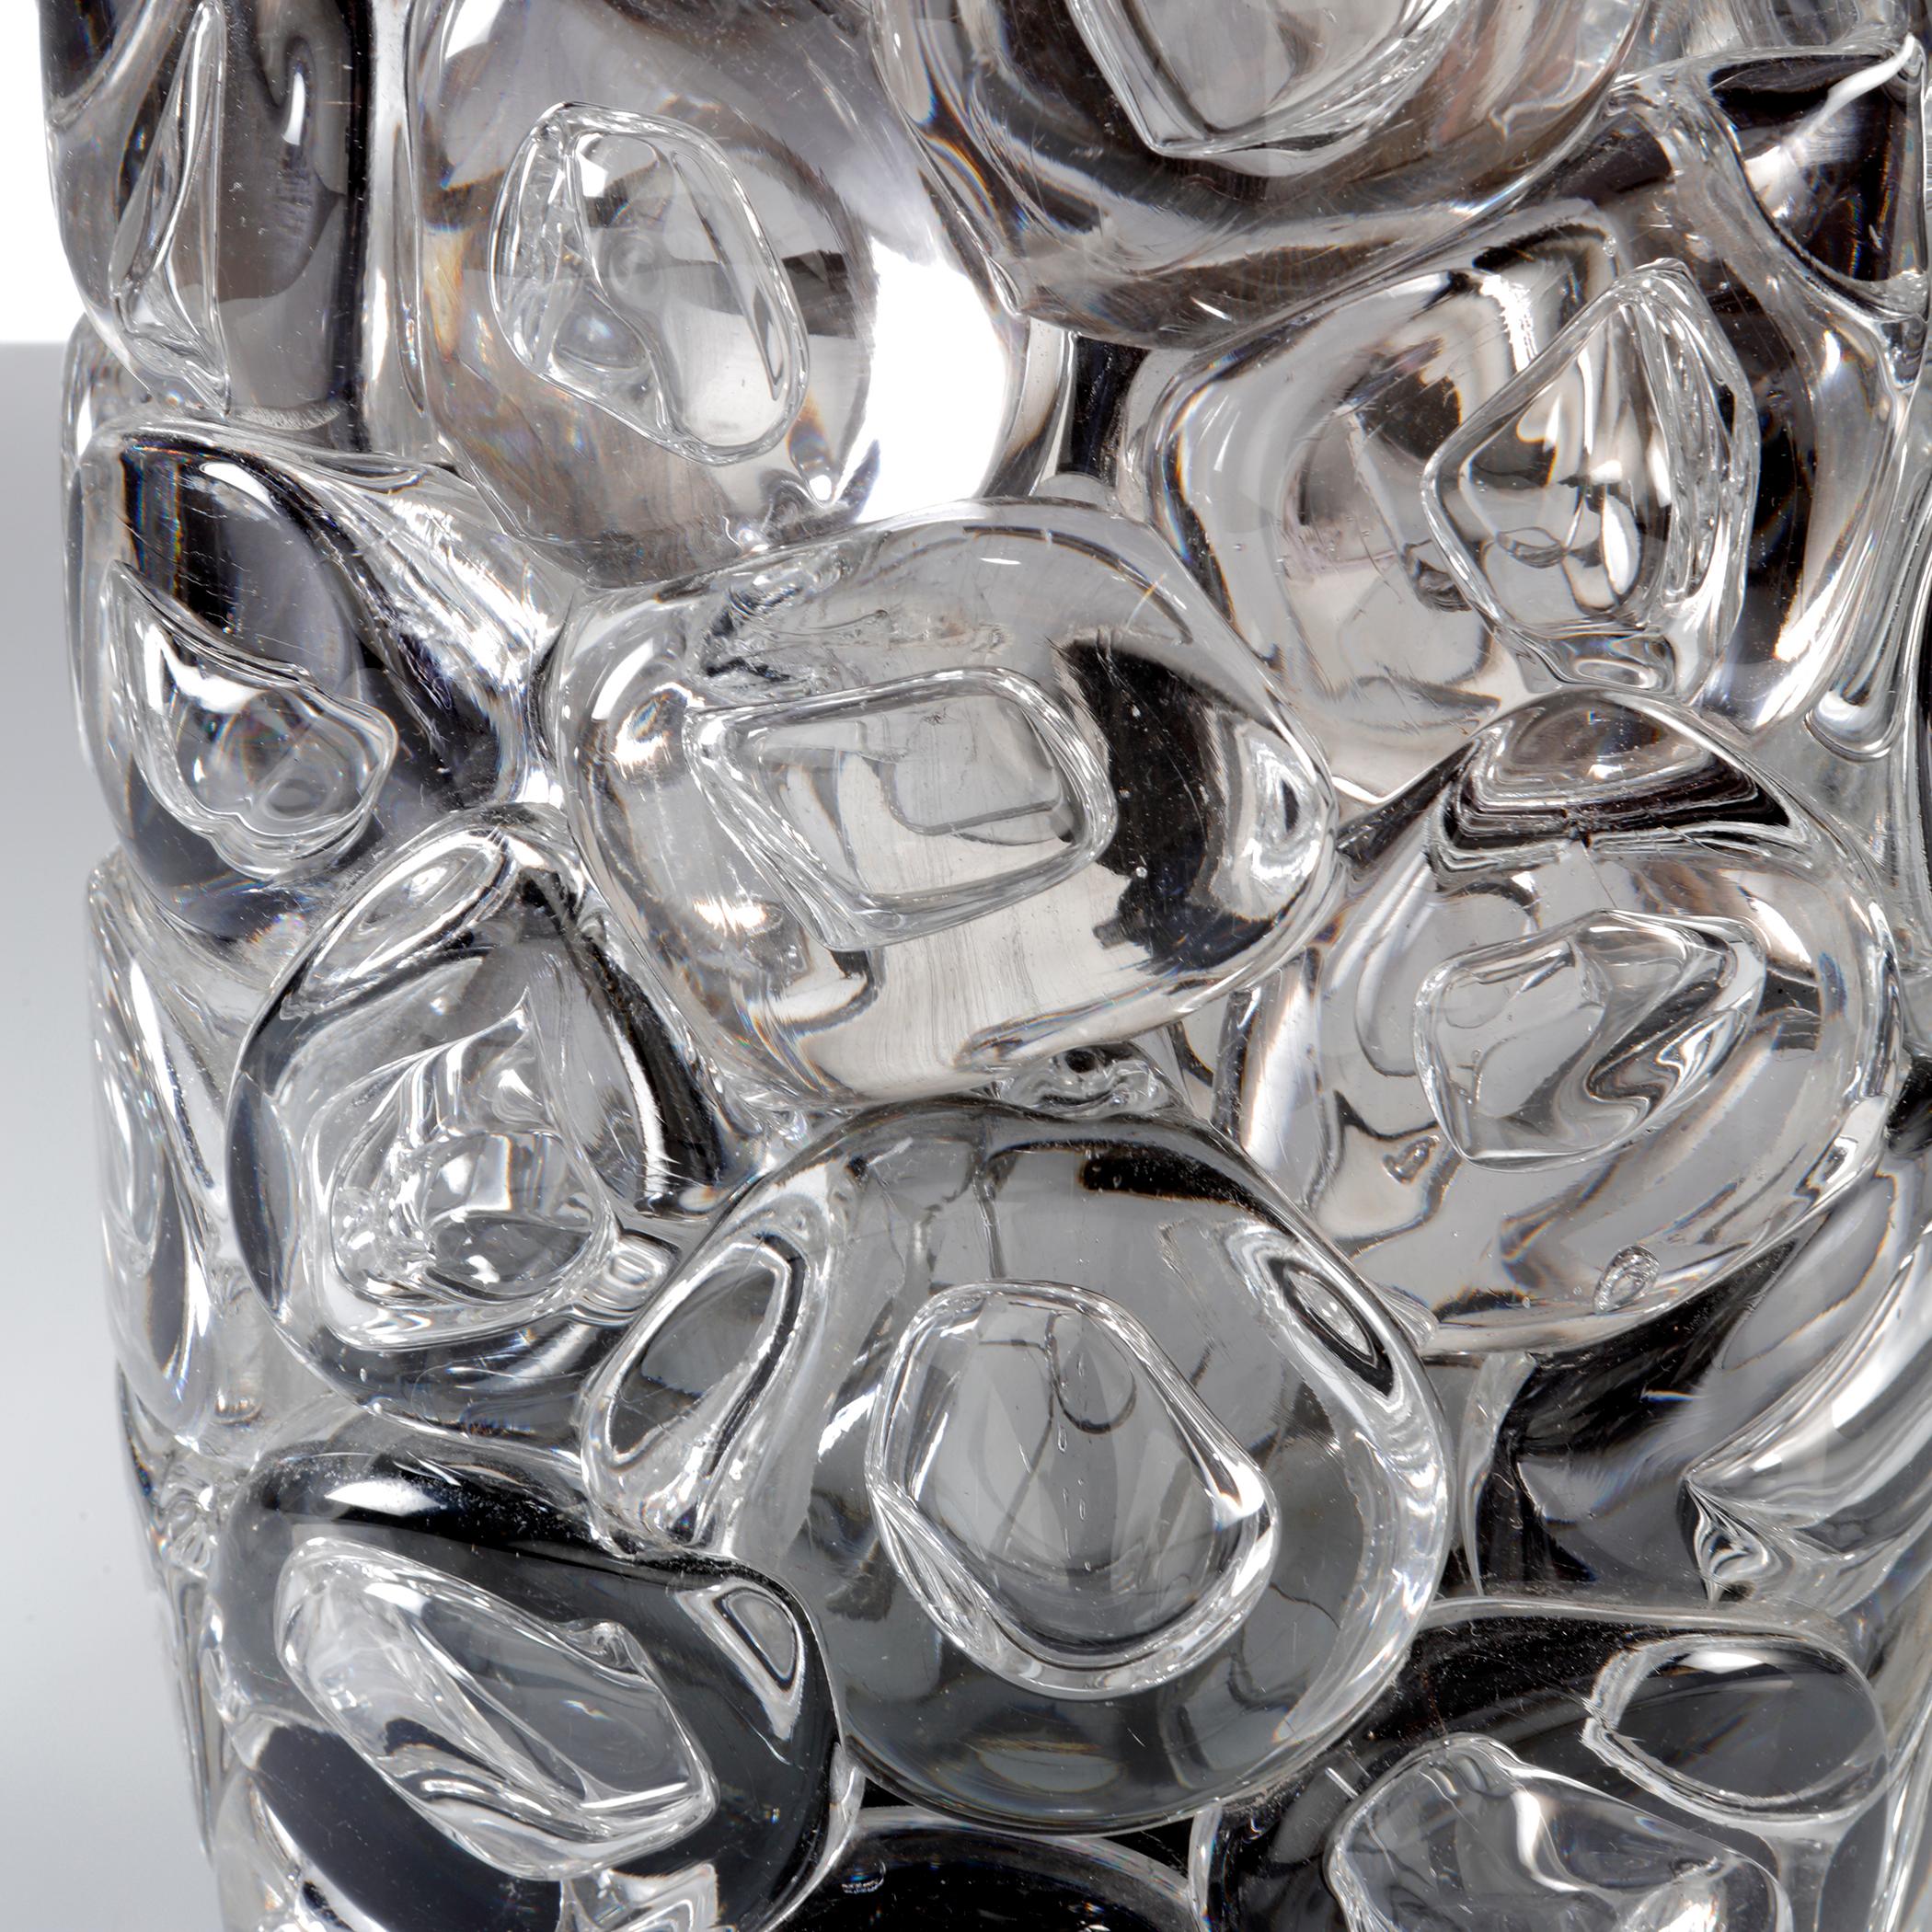 Contemporary Bubblewrap in Monochrome II, a Silver and Clear Glass Vase by Allister Malcolm